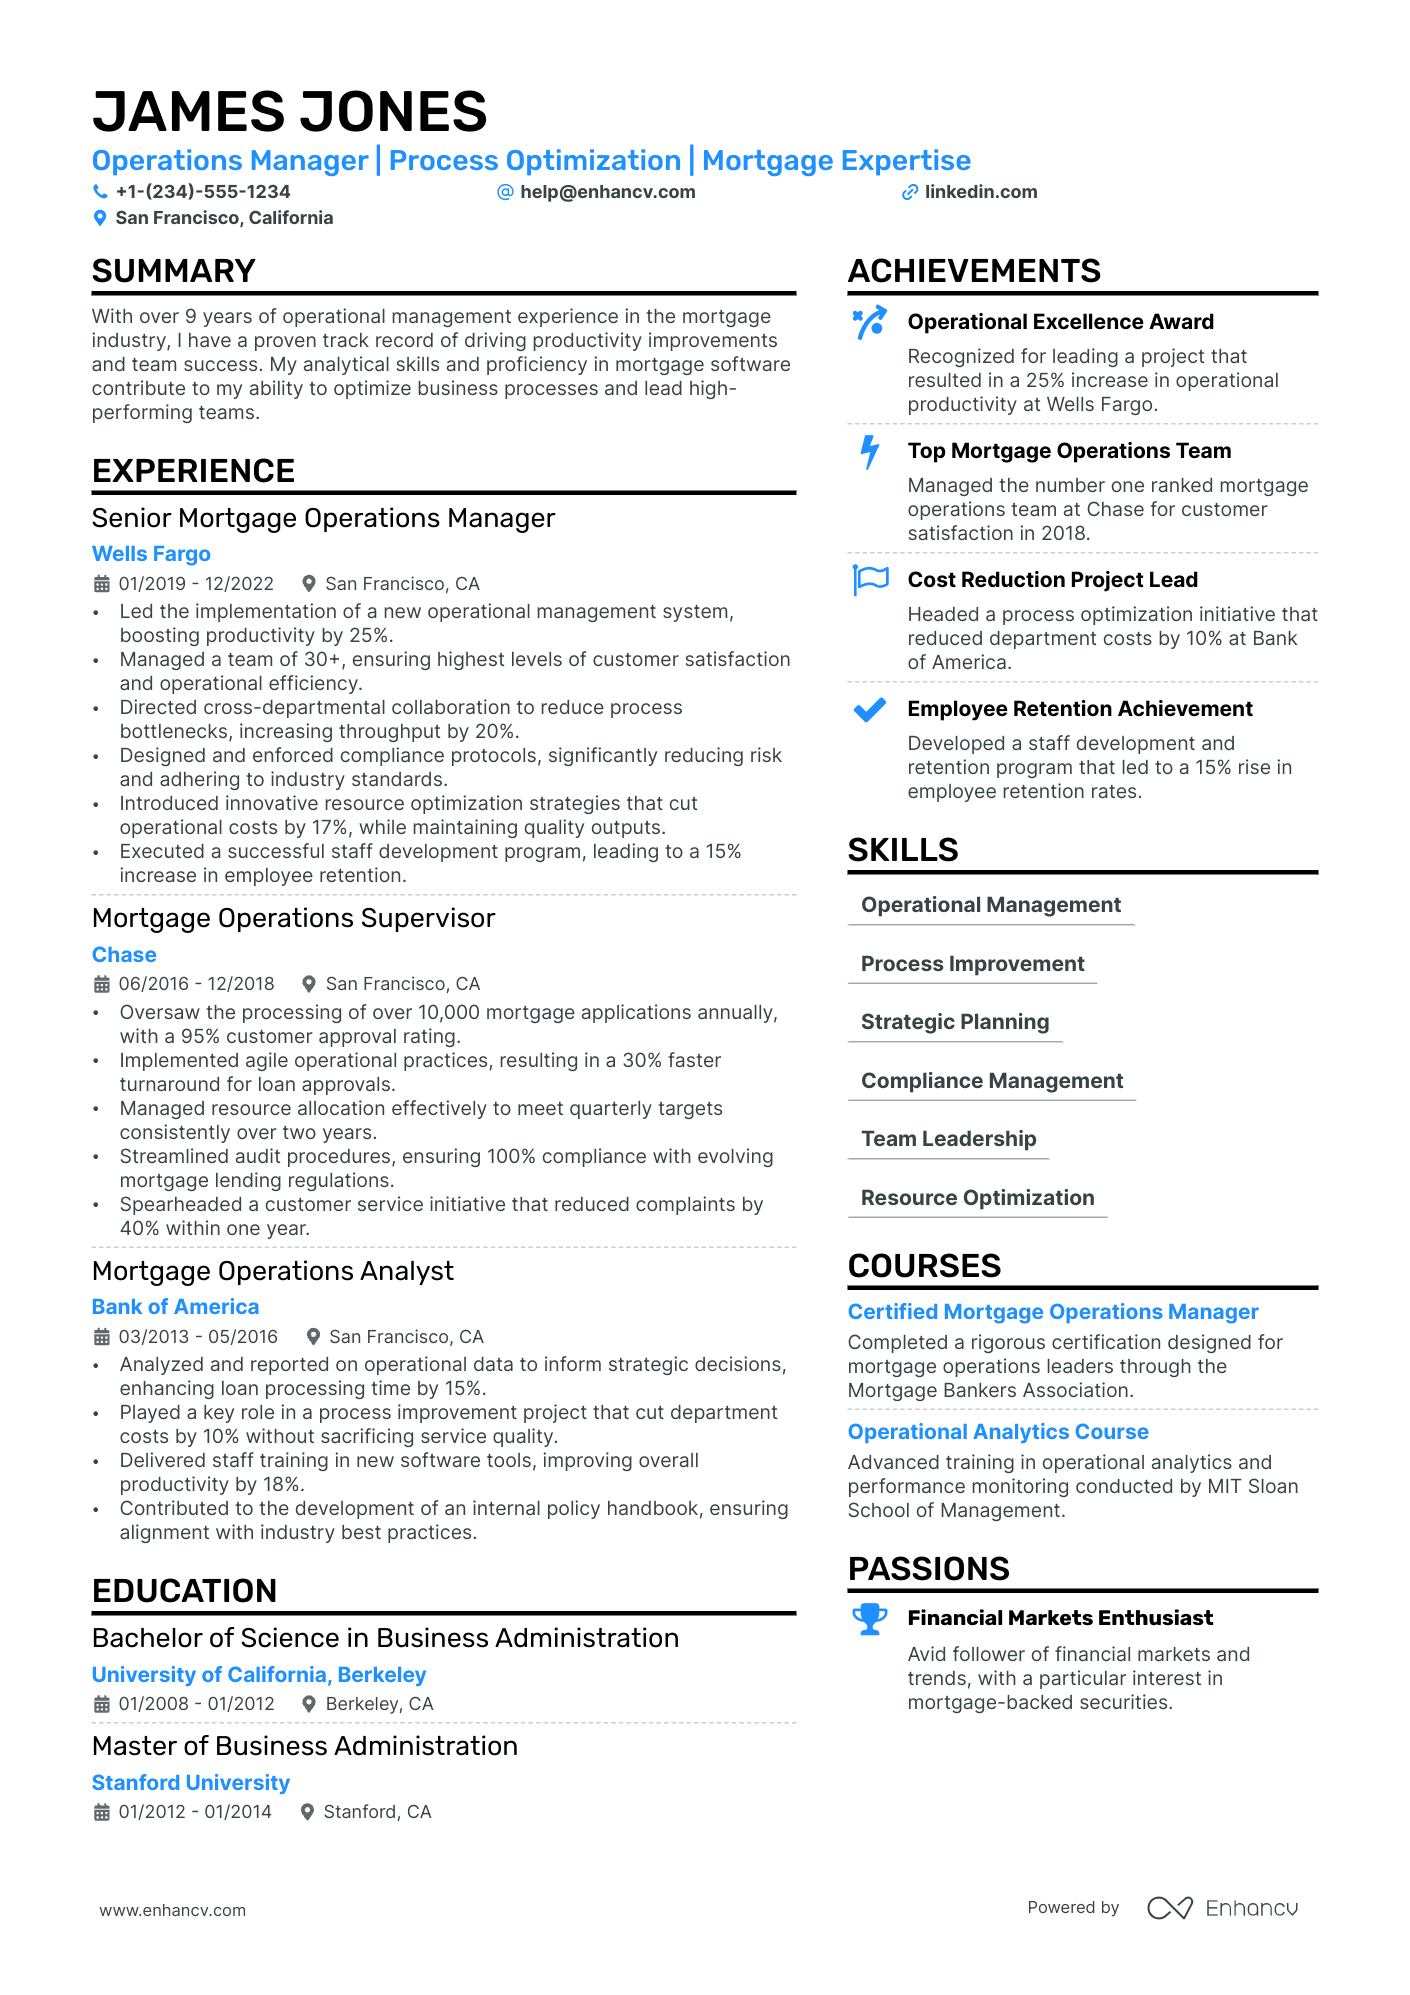 Mortgage Operations Manager resume example